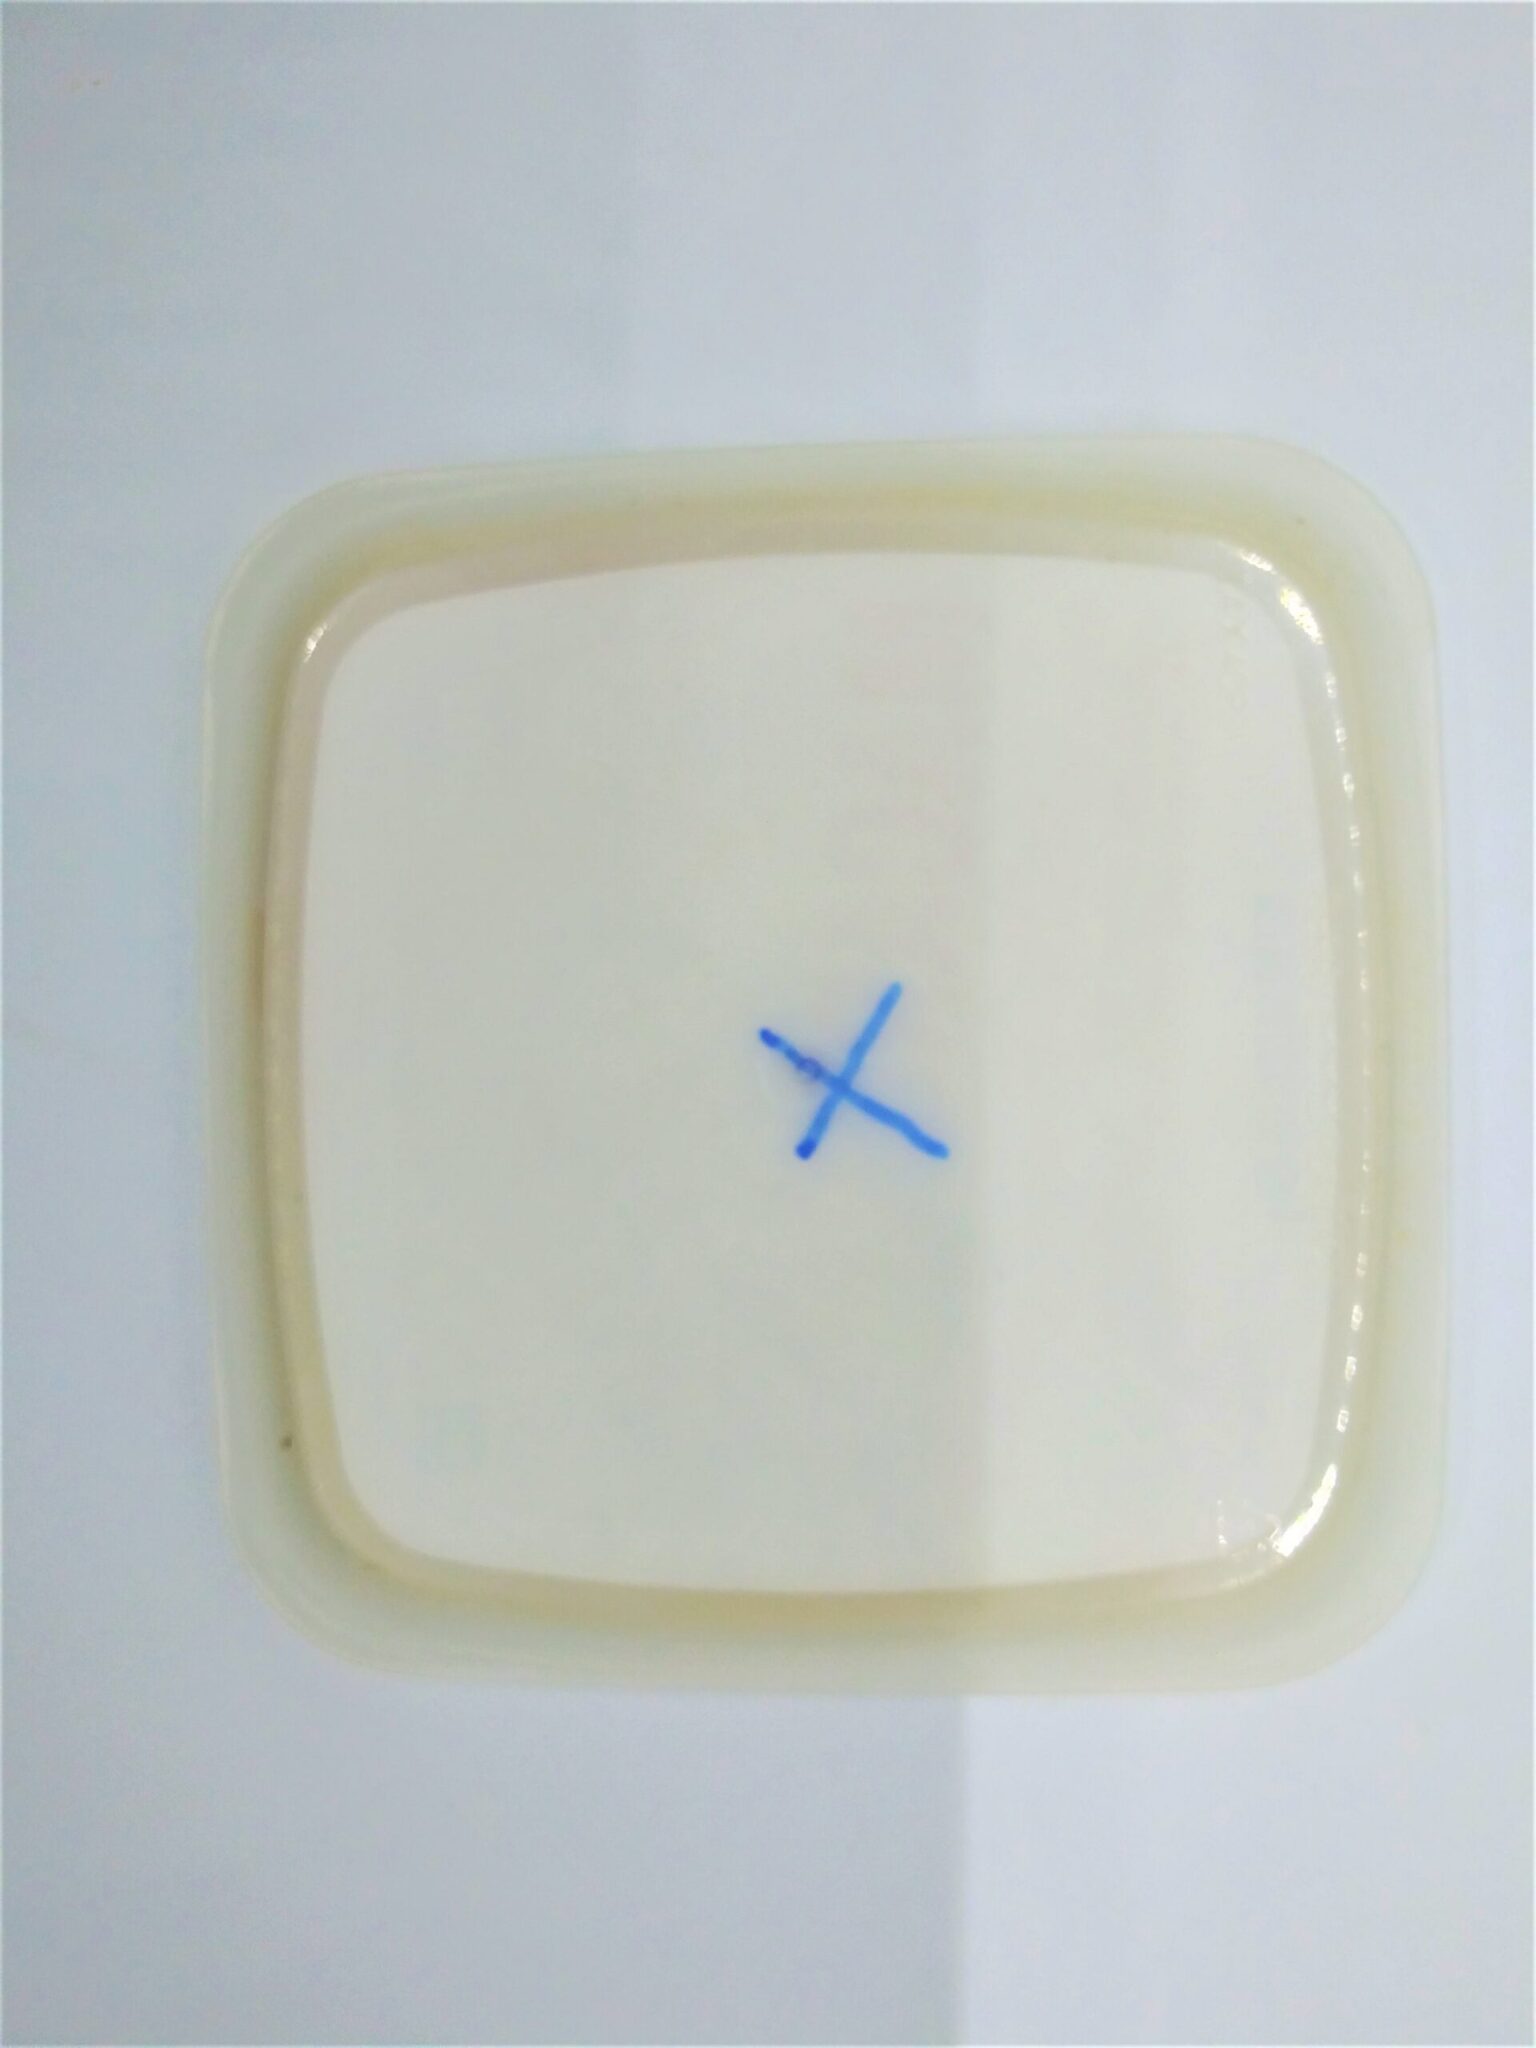 Homemade anal sex toys, photo of a plastic lid with an X drawn in the center.